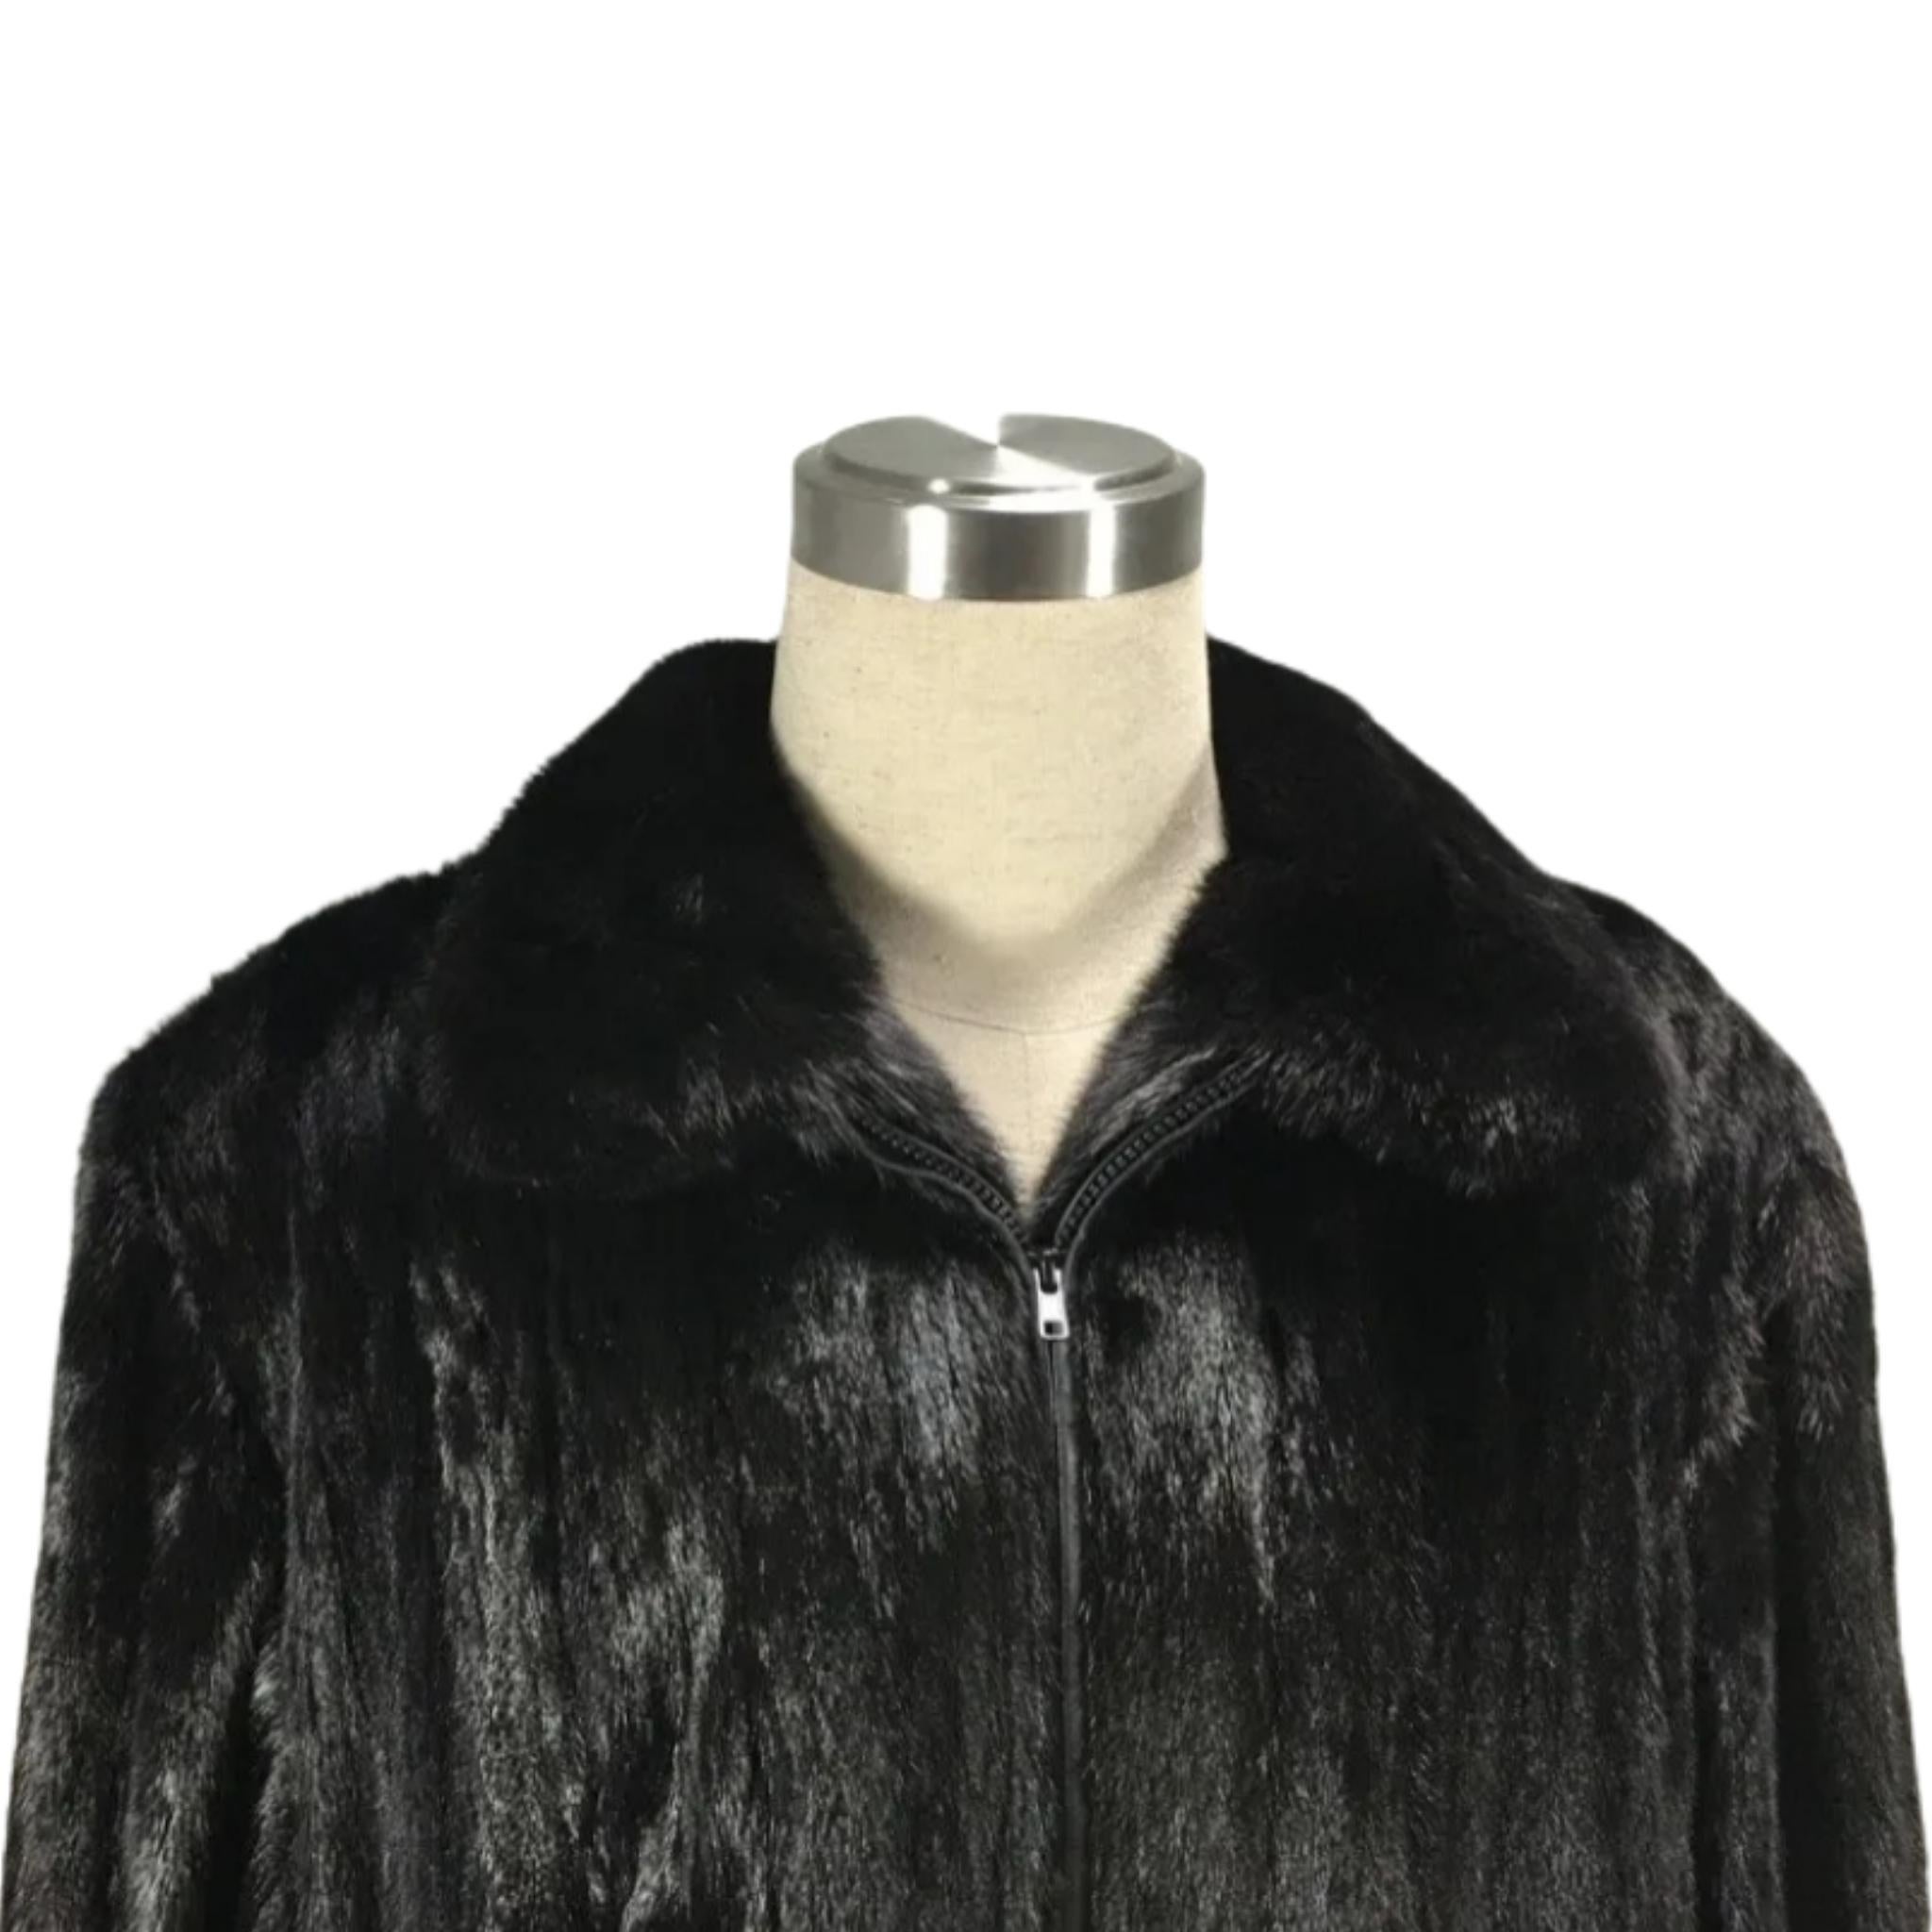 Brand new Big Tall Blackglama Men's mink fur coat bomber jacket size 2 XL In New Condition For Sale In Montreal, Quebec